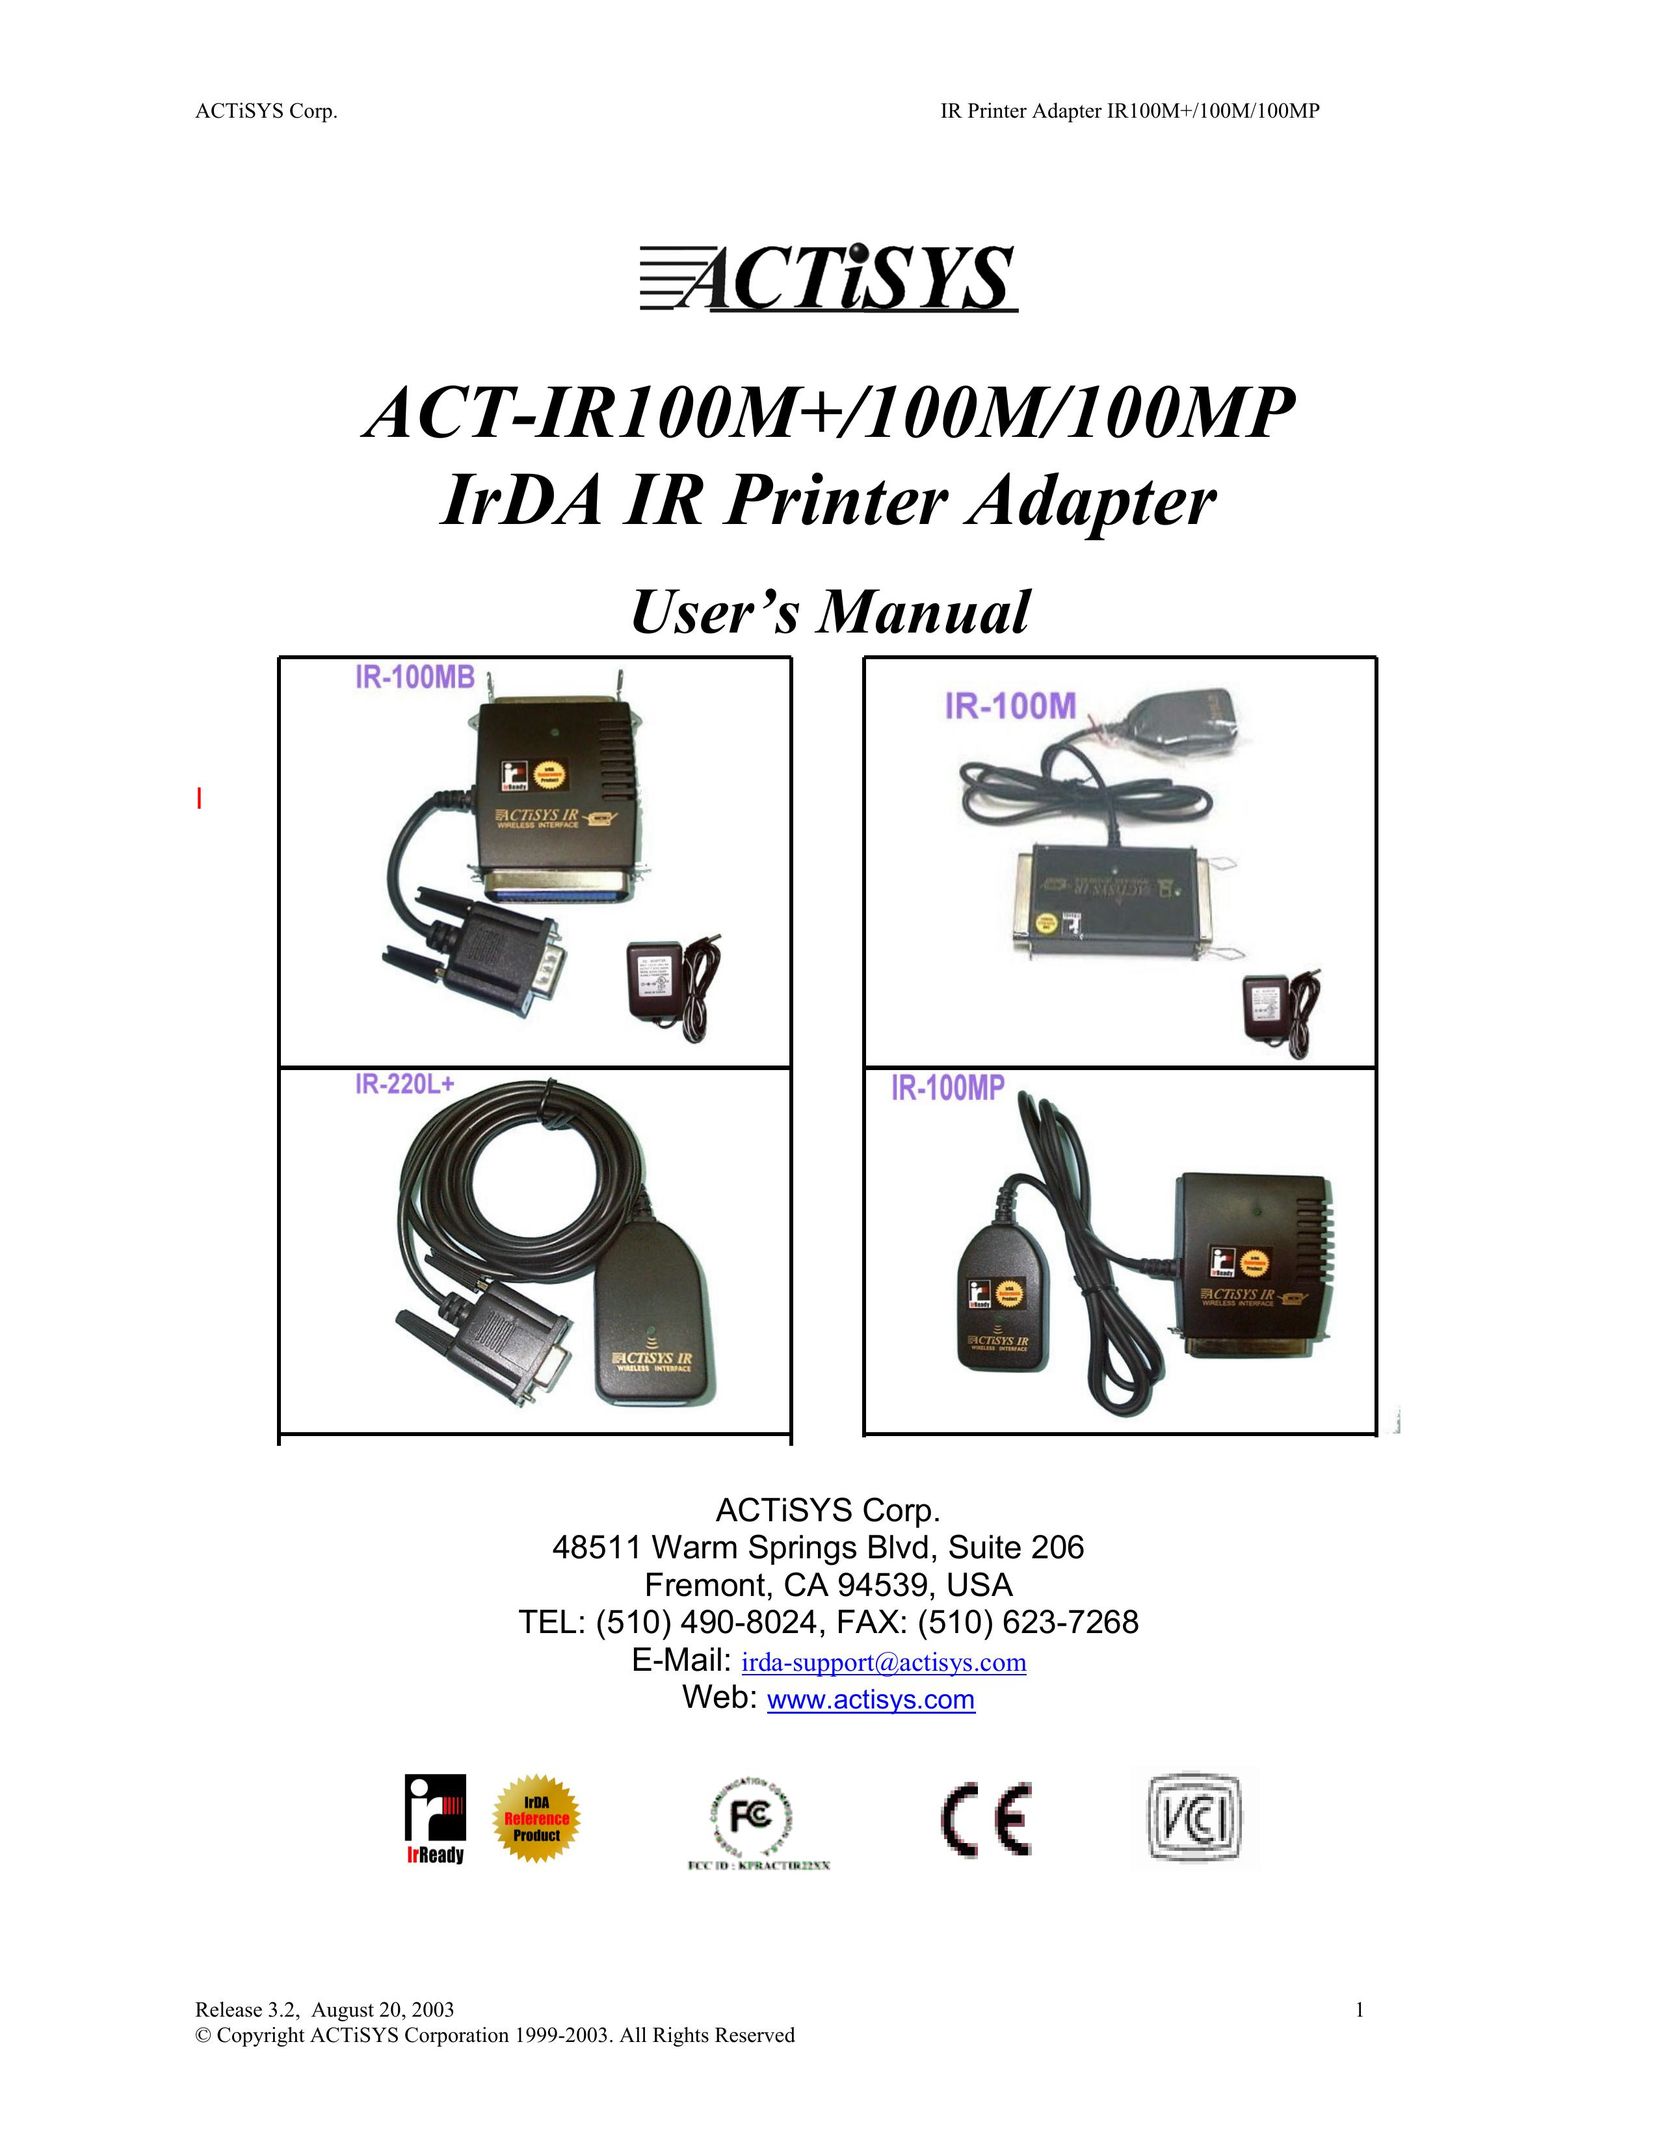 ACTiSYS ACT-IR100M Network Card User Manual (Page 1)